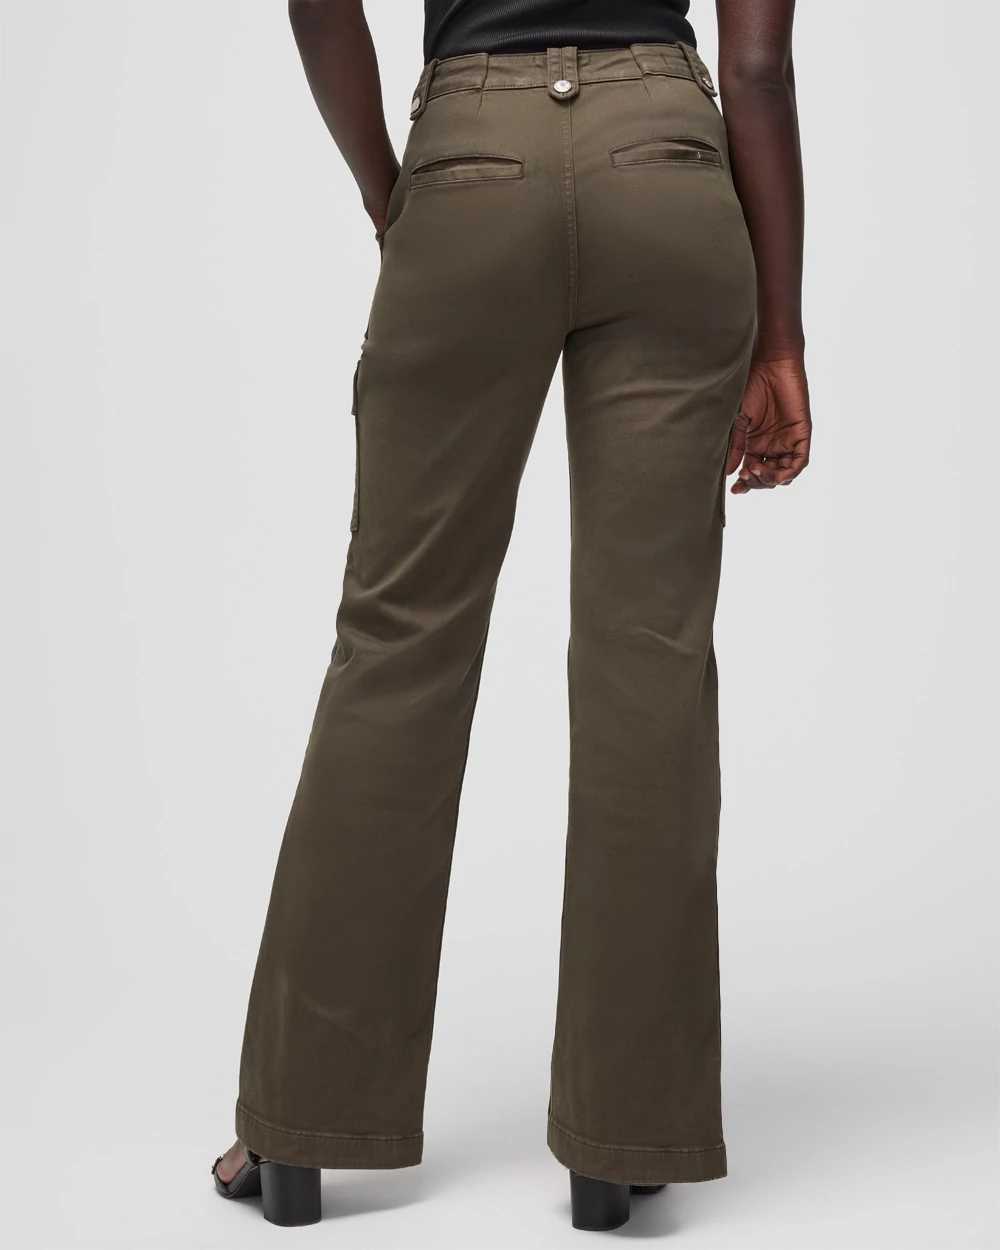 Curvy Extra High-Rise Pret Cargo Trouser click to view larger image.